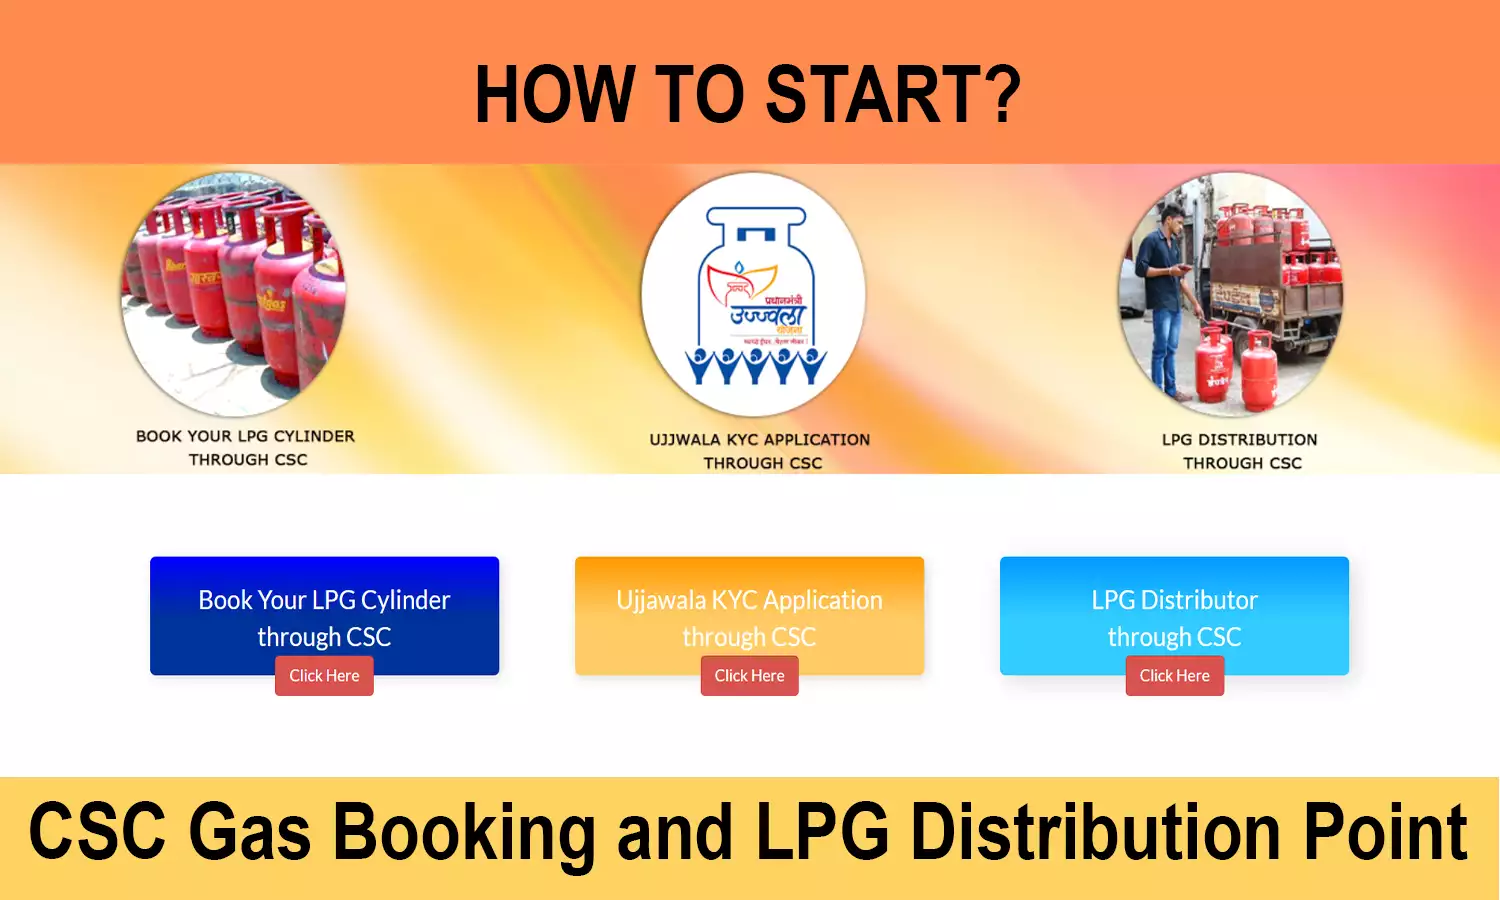 CSC Gas Booking and LPG Distribution Point